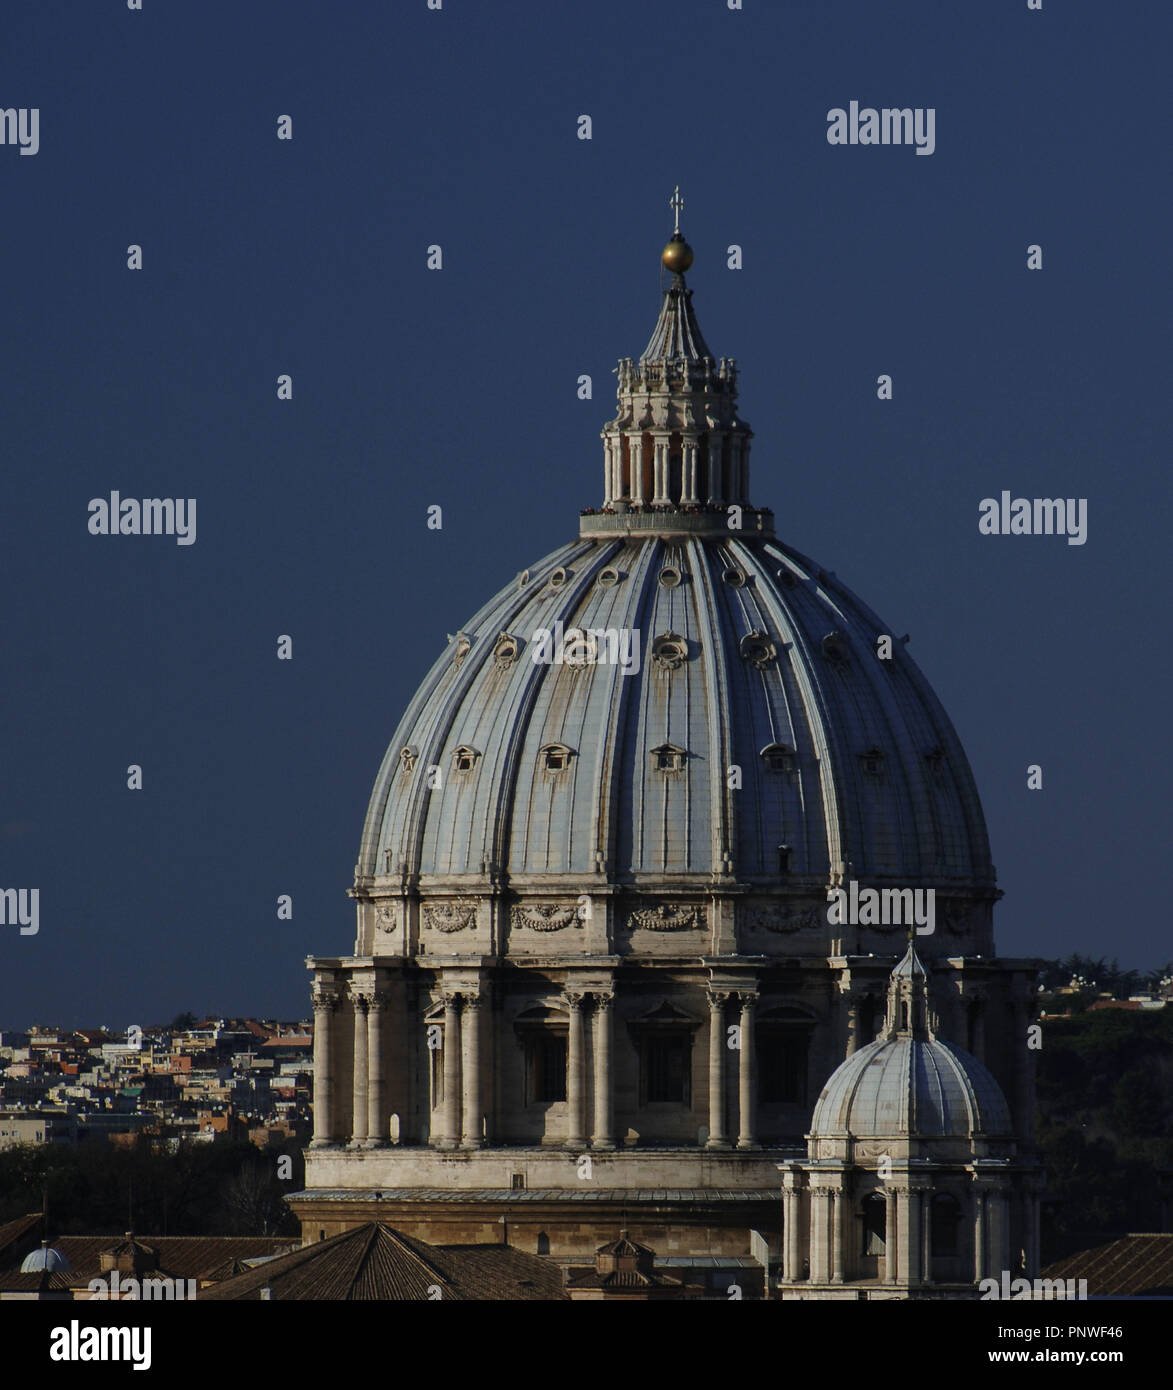 Vatican City. Dome of the Basilica of St. Peter, built by Michelangelo (1475-1564) and completed by Domenico Fontana (1543-1607) and Giacomo della Porta (1540-1602). 16th century. Exterior. Stock Photo